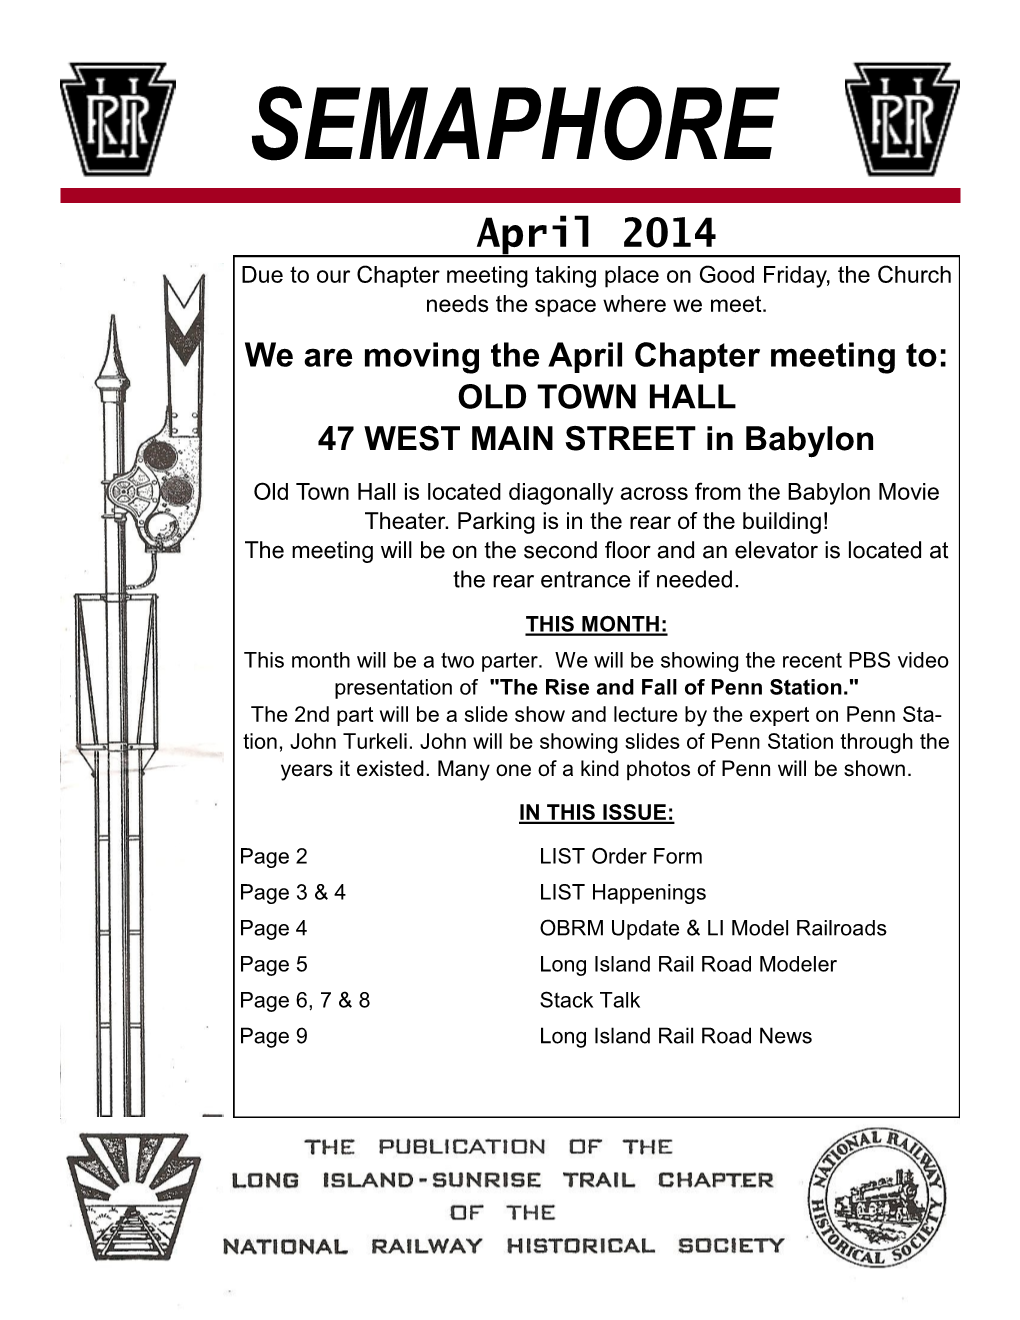 SEMAPHORE April 2014 Due to Our Chapter Meeting Taking Place on Good Friday, the Church Needs the Space Where We Meet